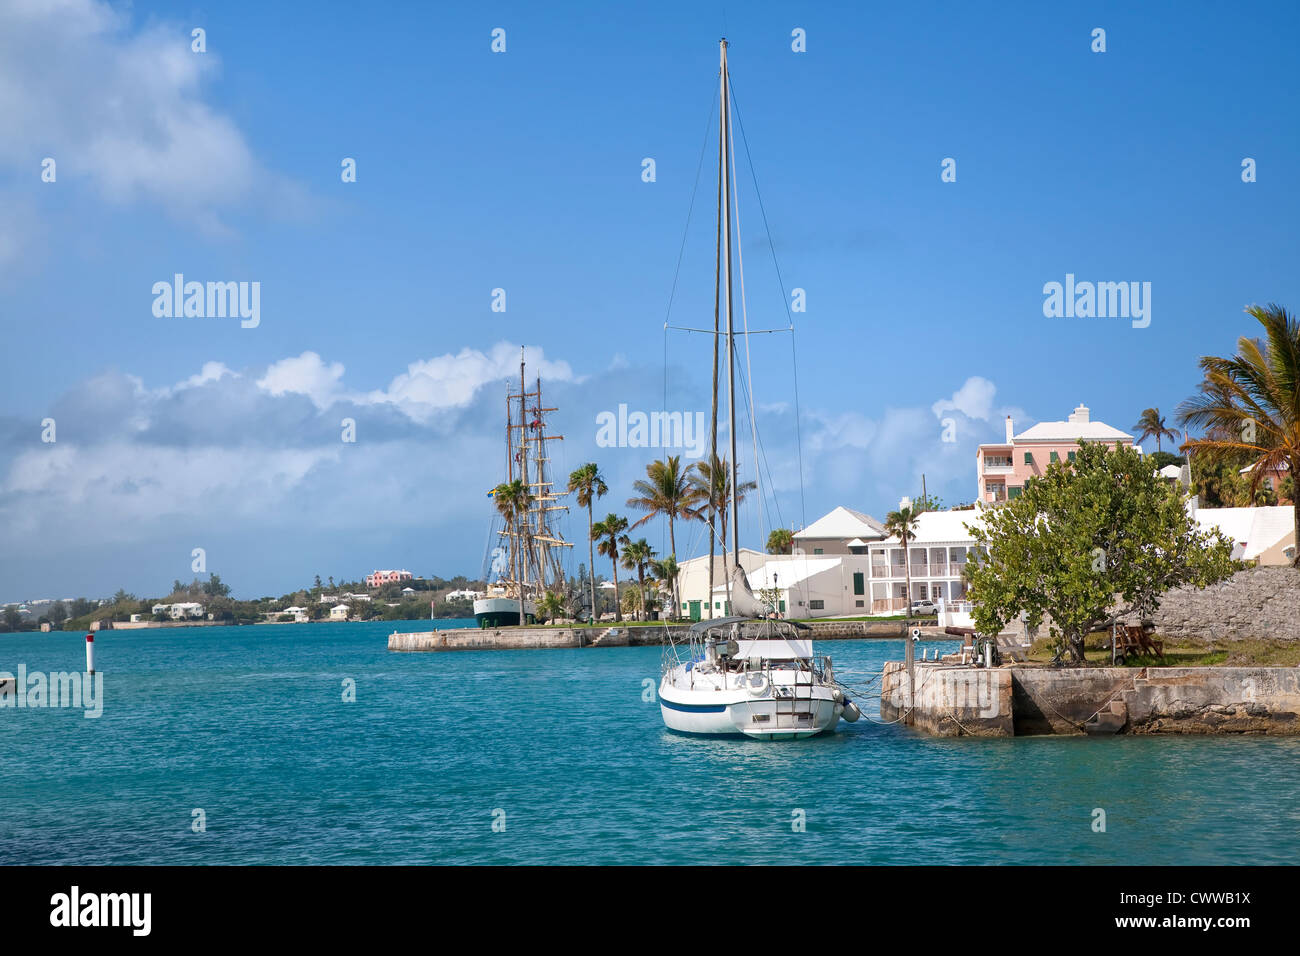 Sailing ships along the waterfront of the town of St. George's, Bermuda. Stock Photo